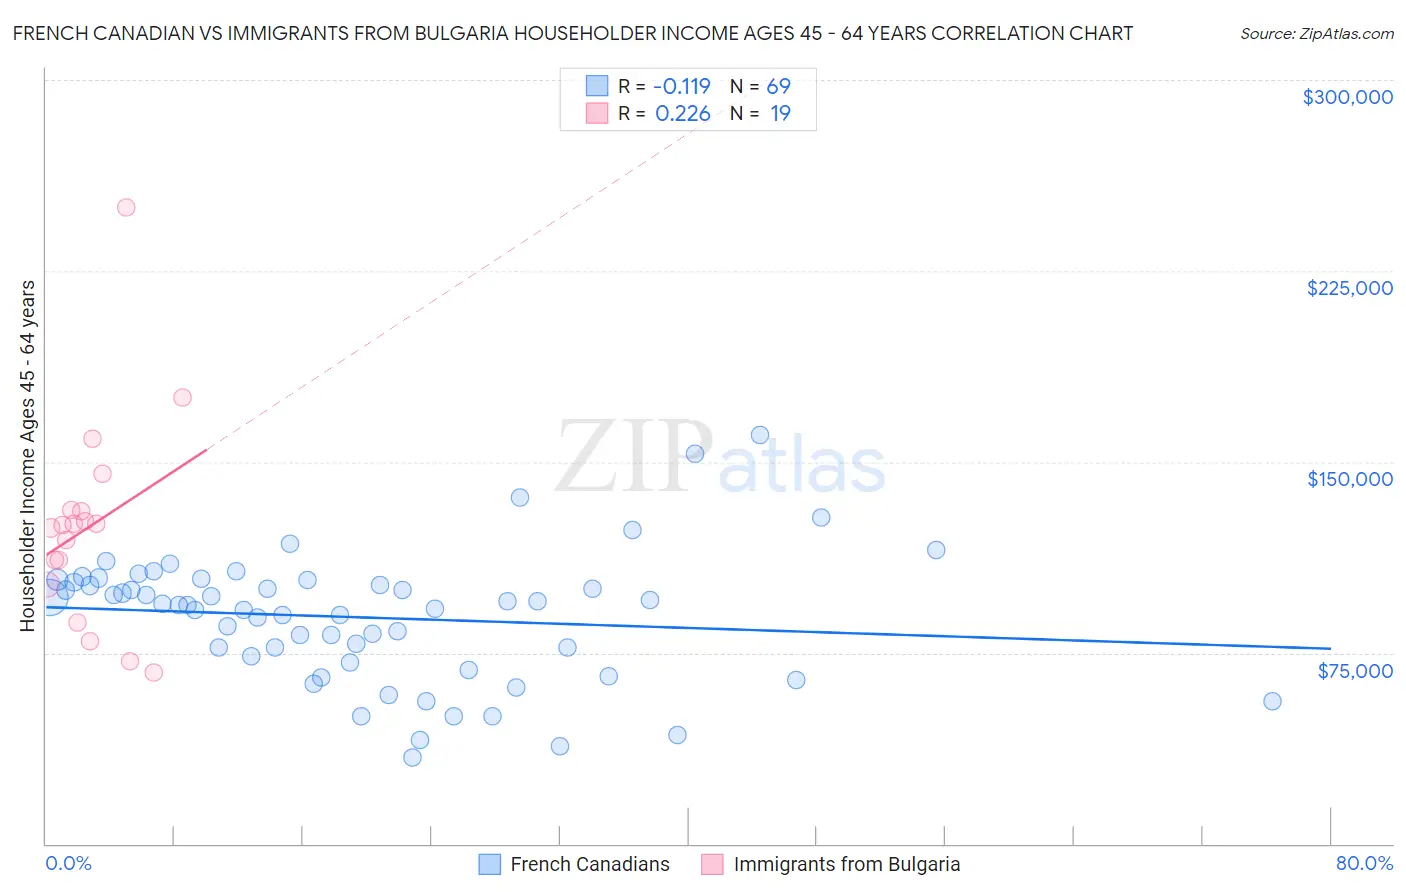 French Canadian vs Immigrants from Bulgaria Householder Income Ages 45 - 64 years